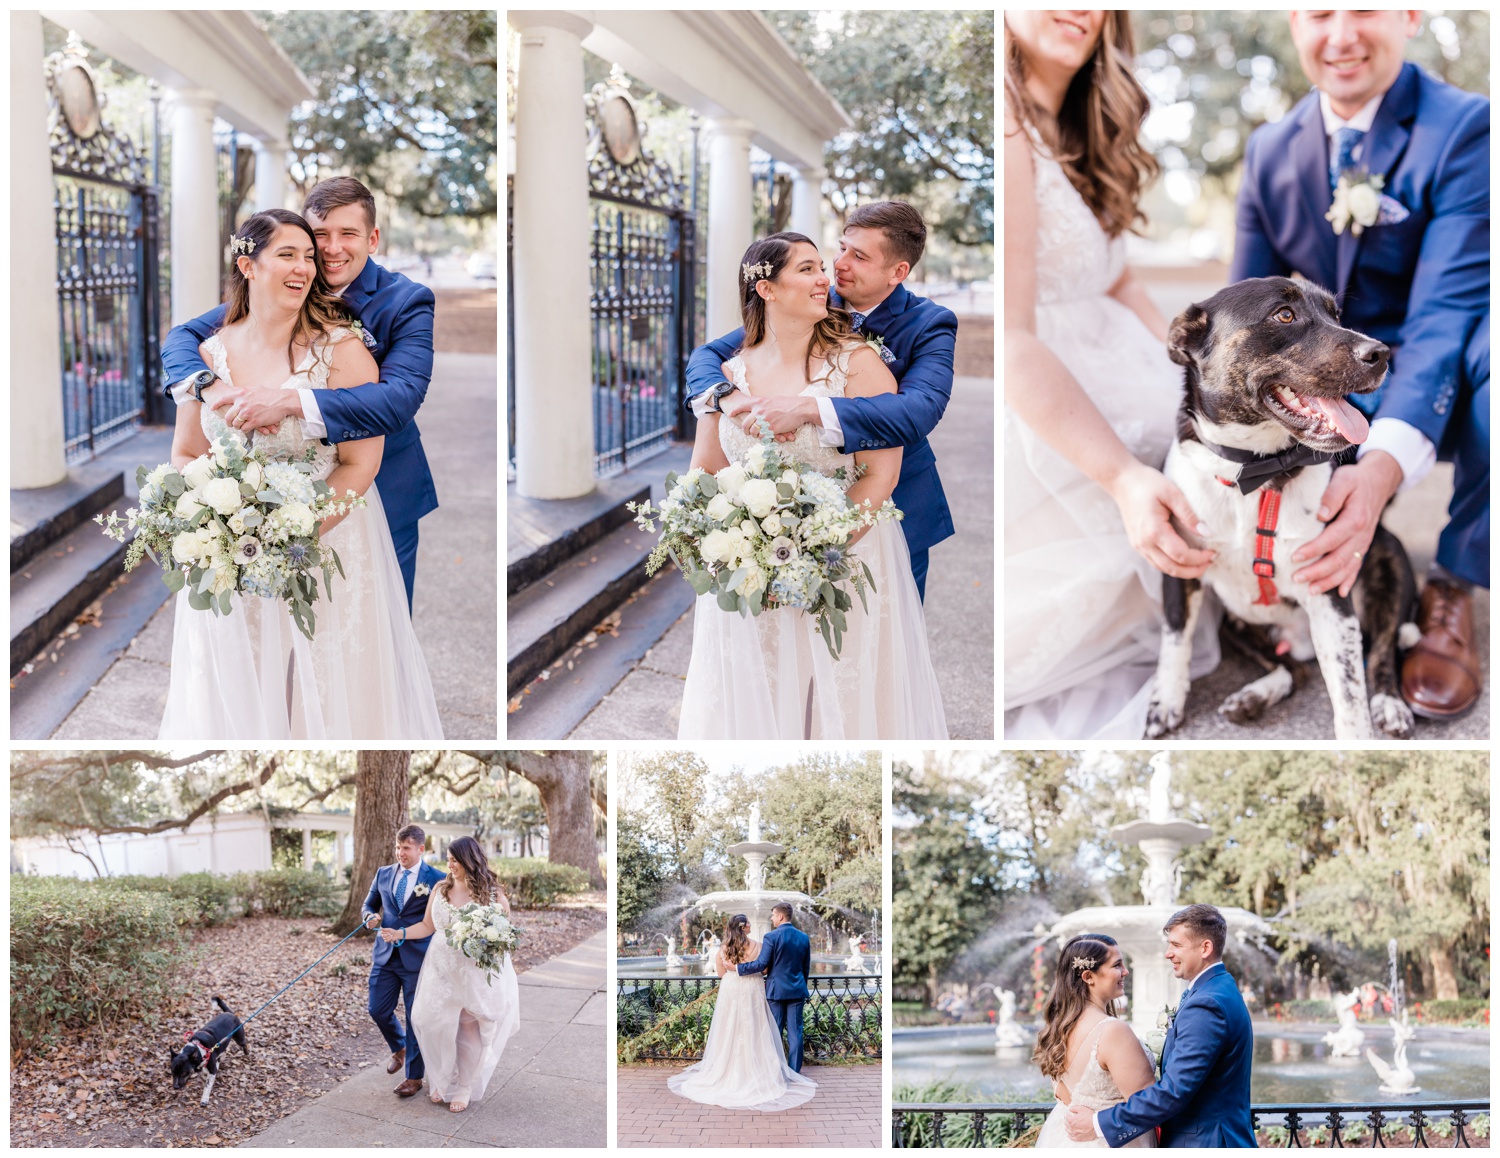 An Under the Oaks Elopement - taylor brown photography - flowers by ivory and beau - royal makeup and hair